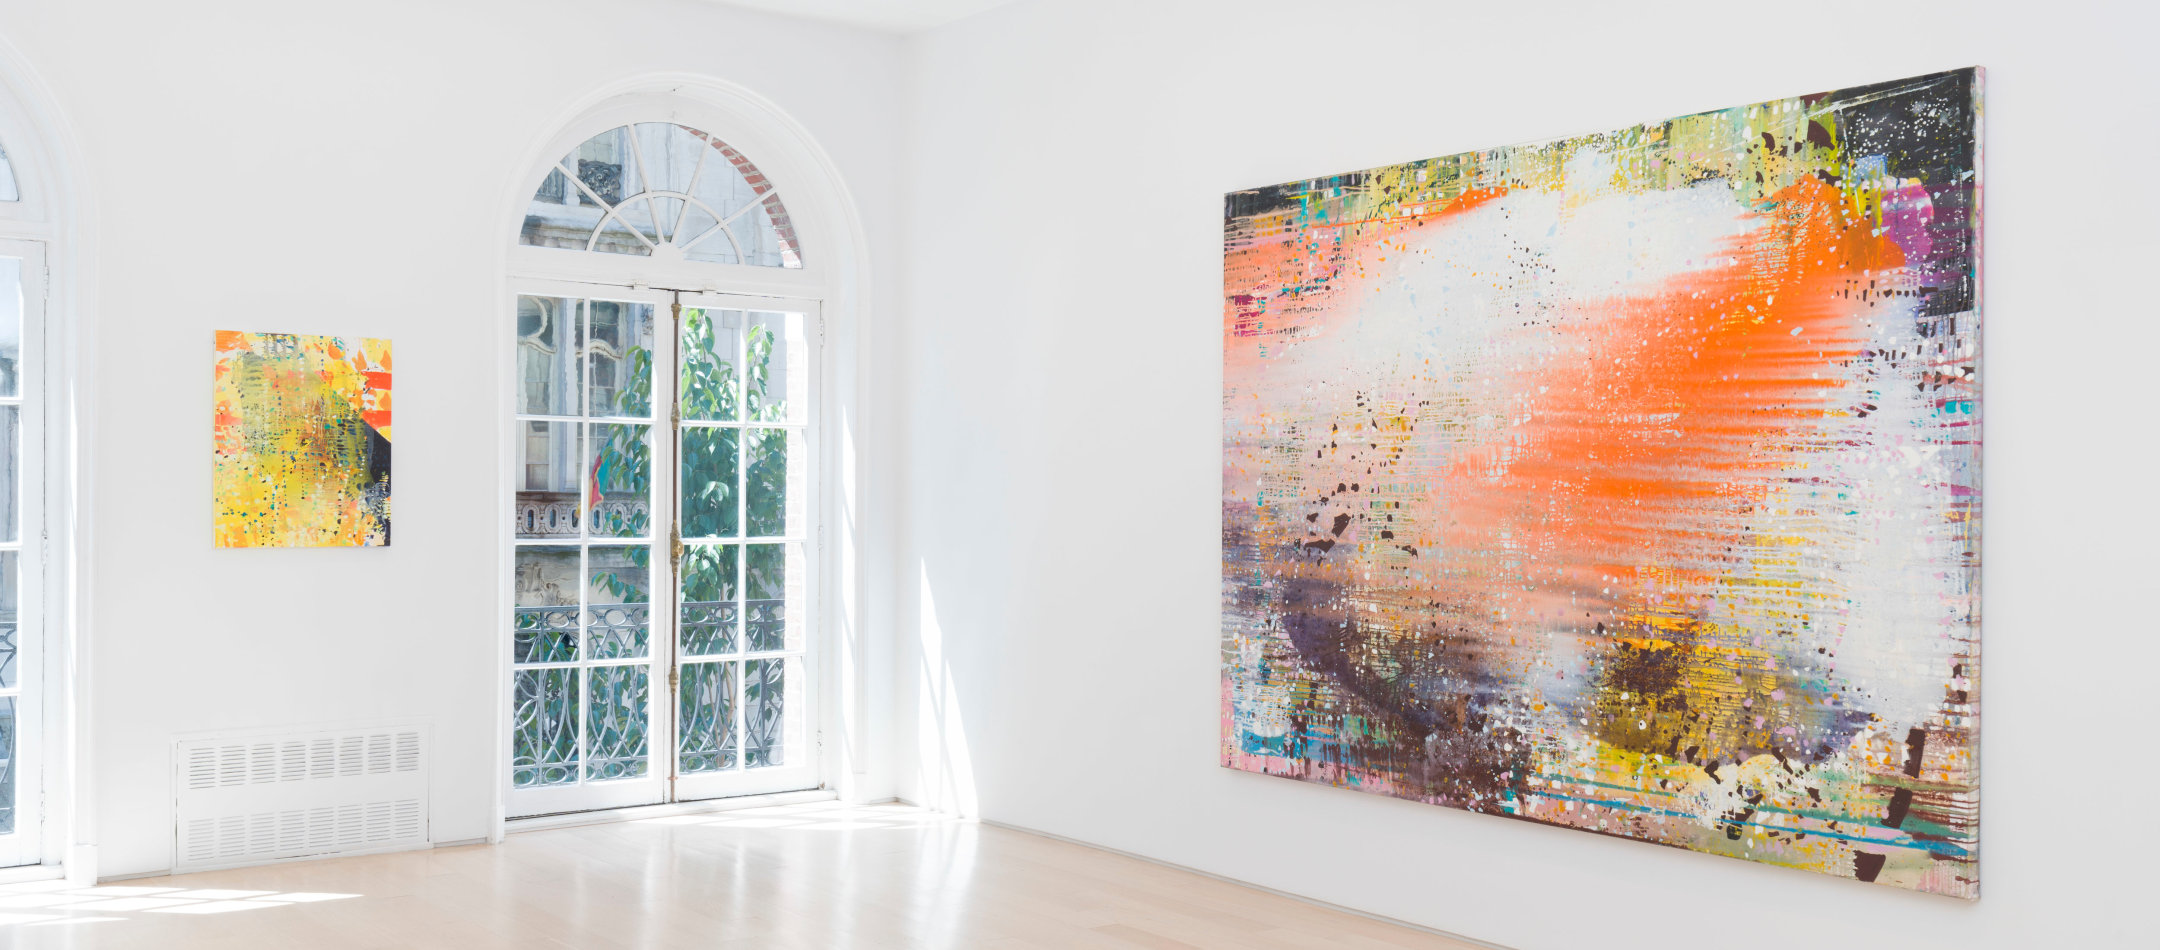 installation view with two large paintings on a white wall